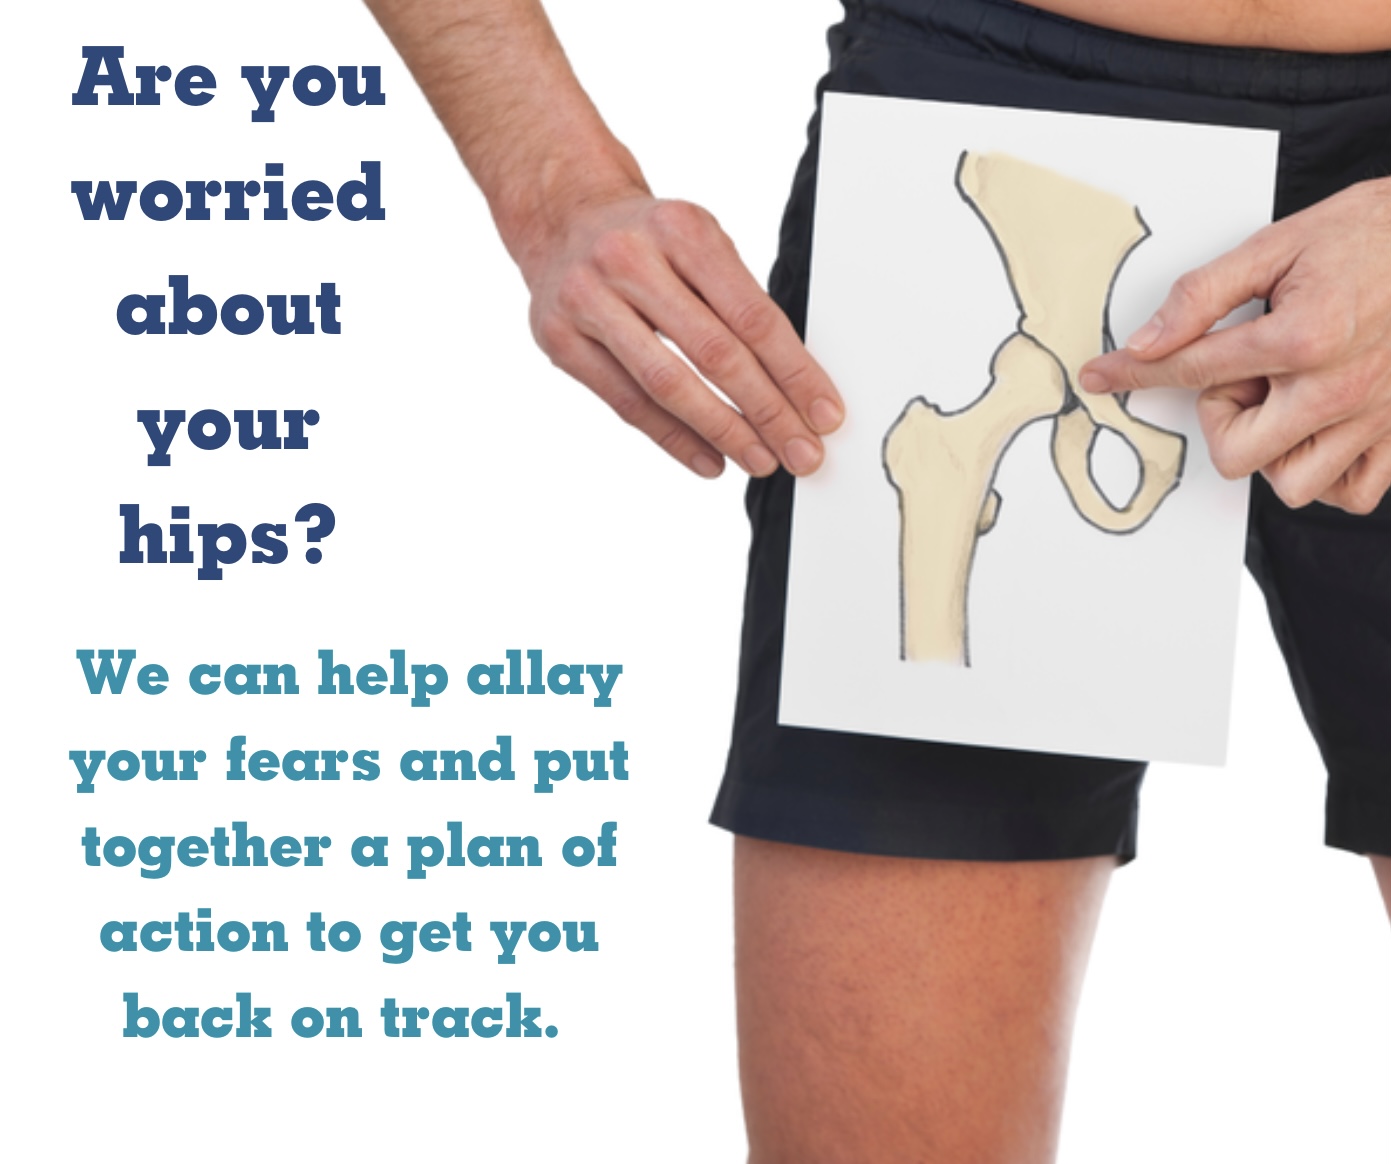 Image of a hip joint and text reads - Are you worried about your hips? We can help allay your fears and put together an action plan to get you back on track.